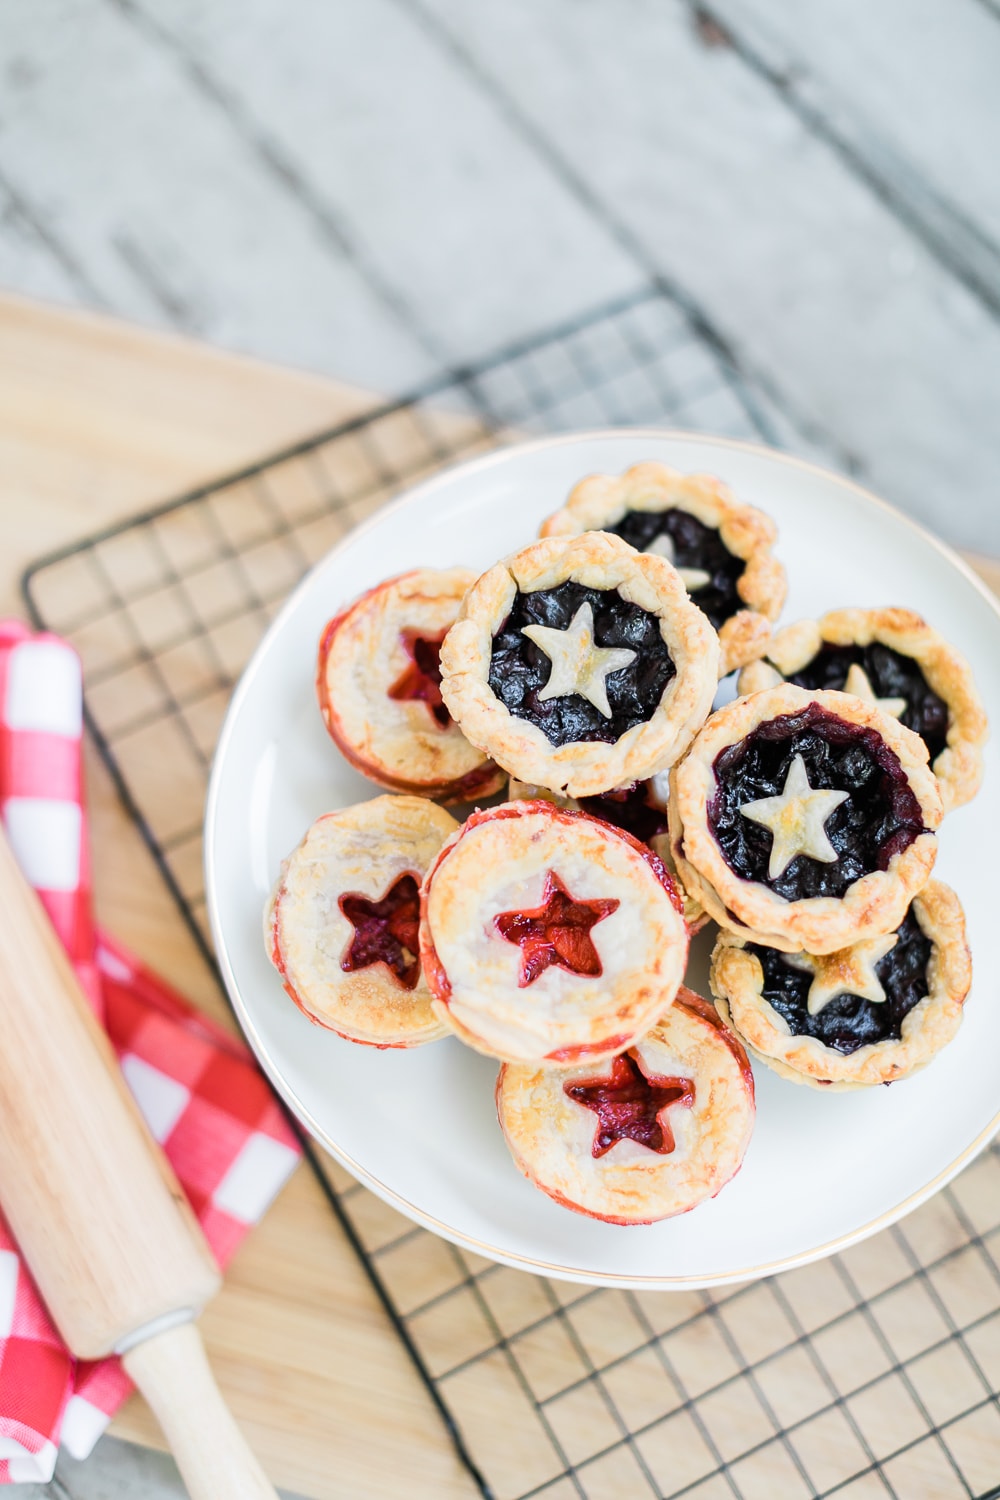 Blogger Stephanie Ziajka shares how to make mini blueberry pies in muffin tins on Diary of a Debutante